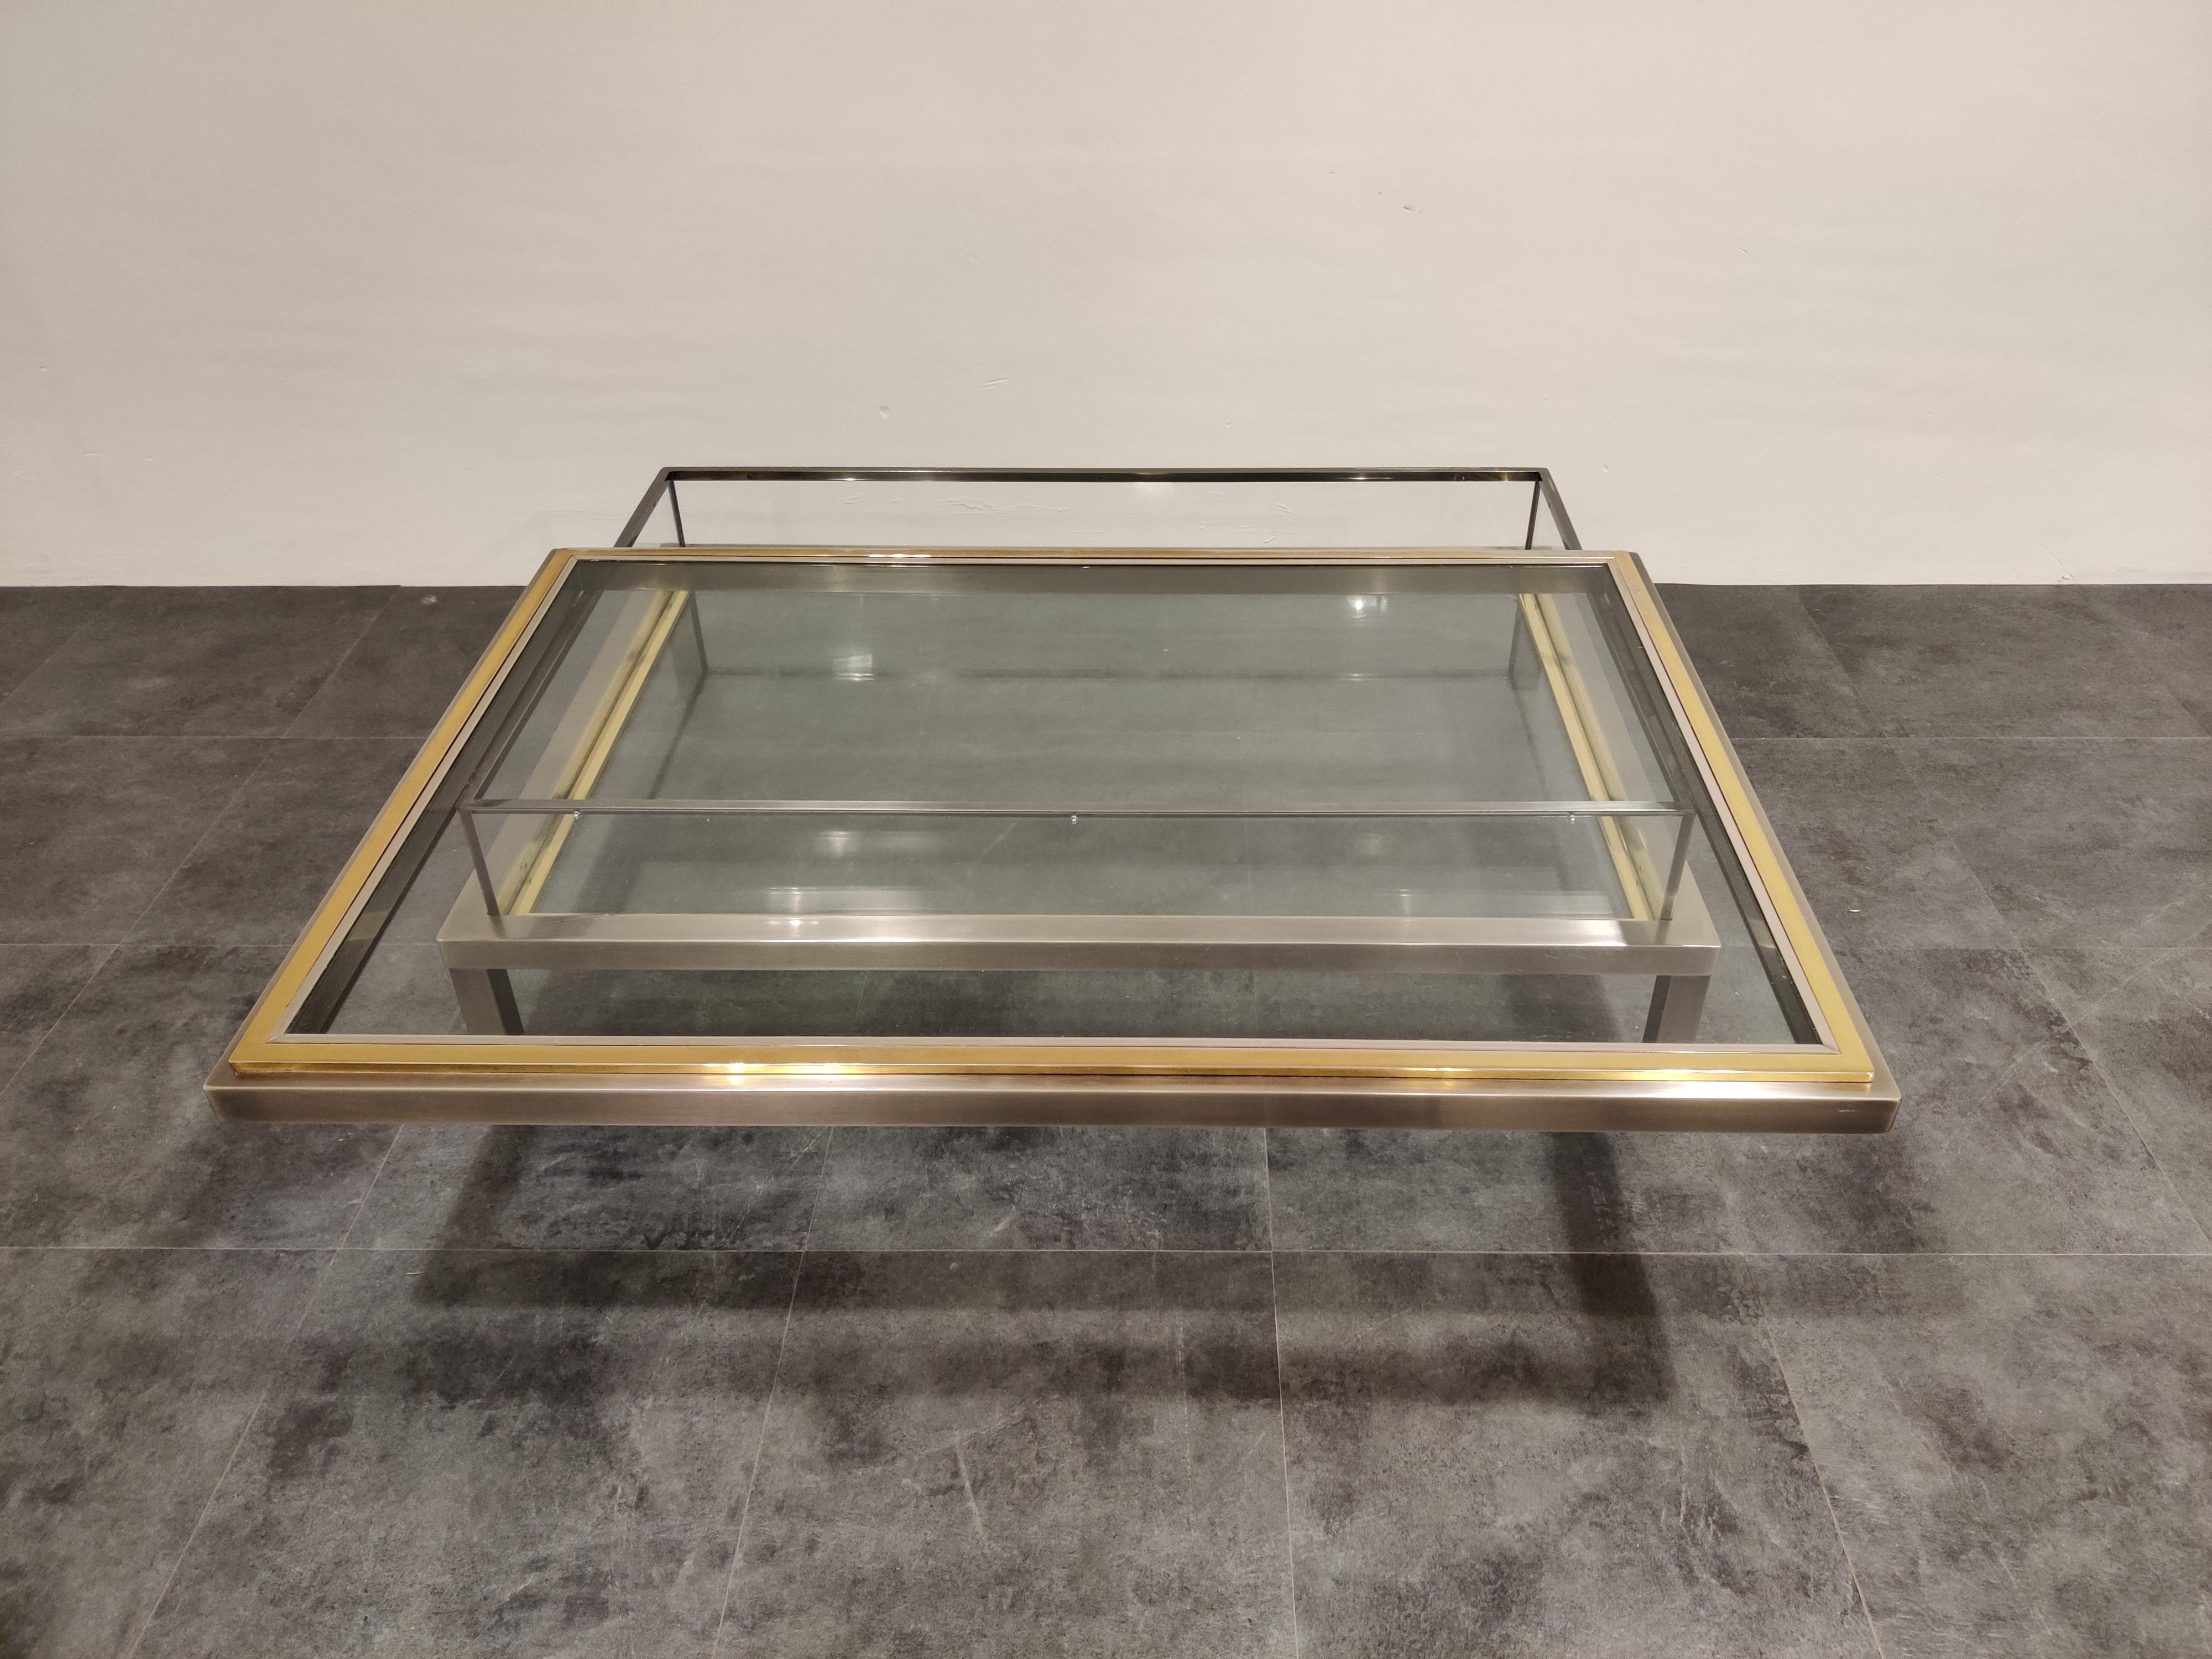 Vintage display coffee table with a sliding glass top.

This luxurious coffee table is made from heavy quality polished steel, brass and glass.

It is ideal to display curio and store magazines.

Perfect condition, like new,

1970s,